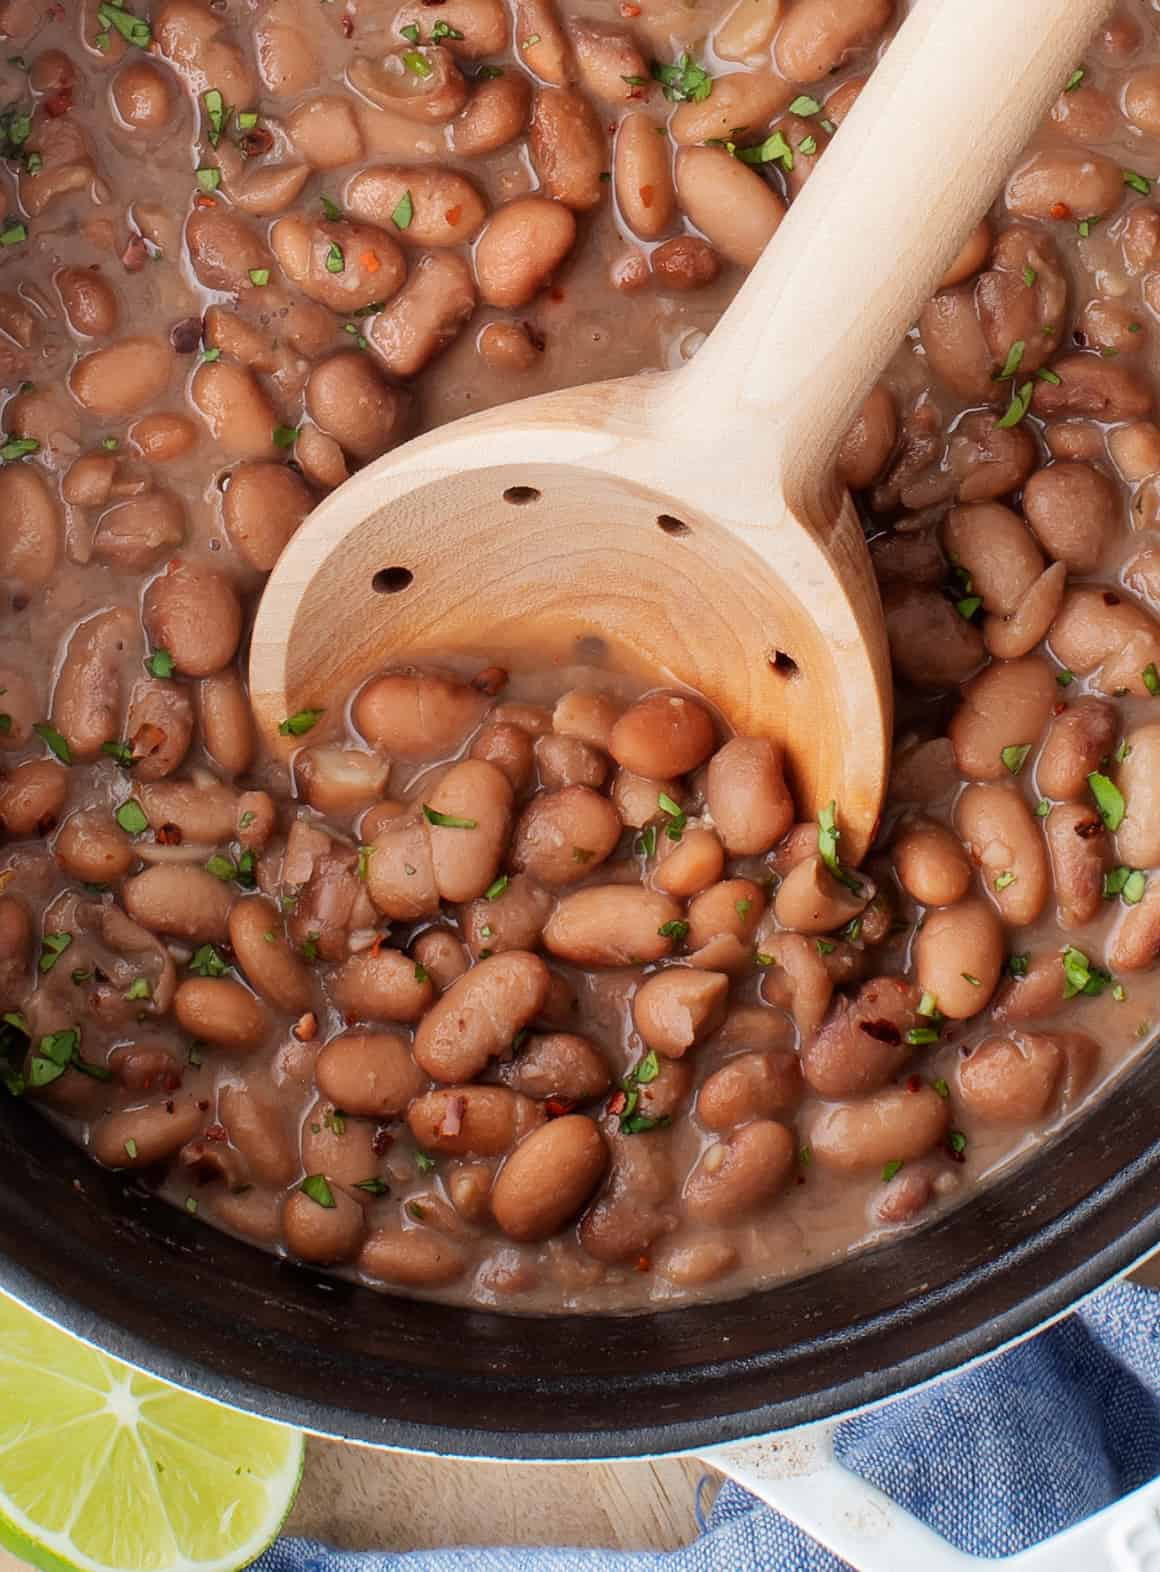 Pot of beans with wooden spoon